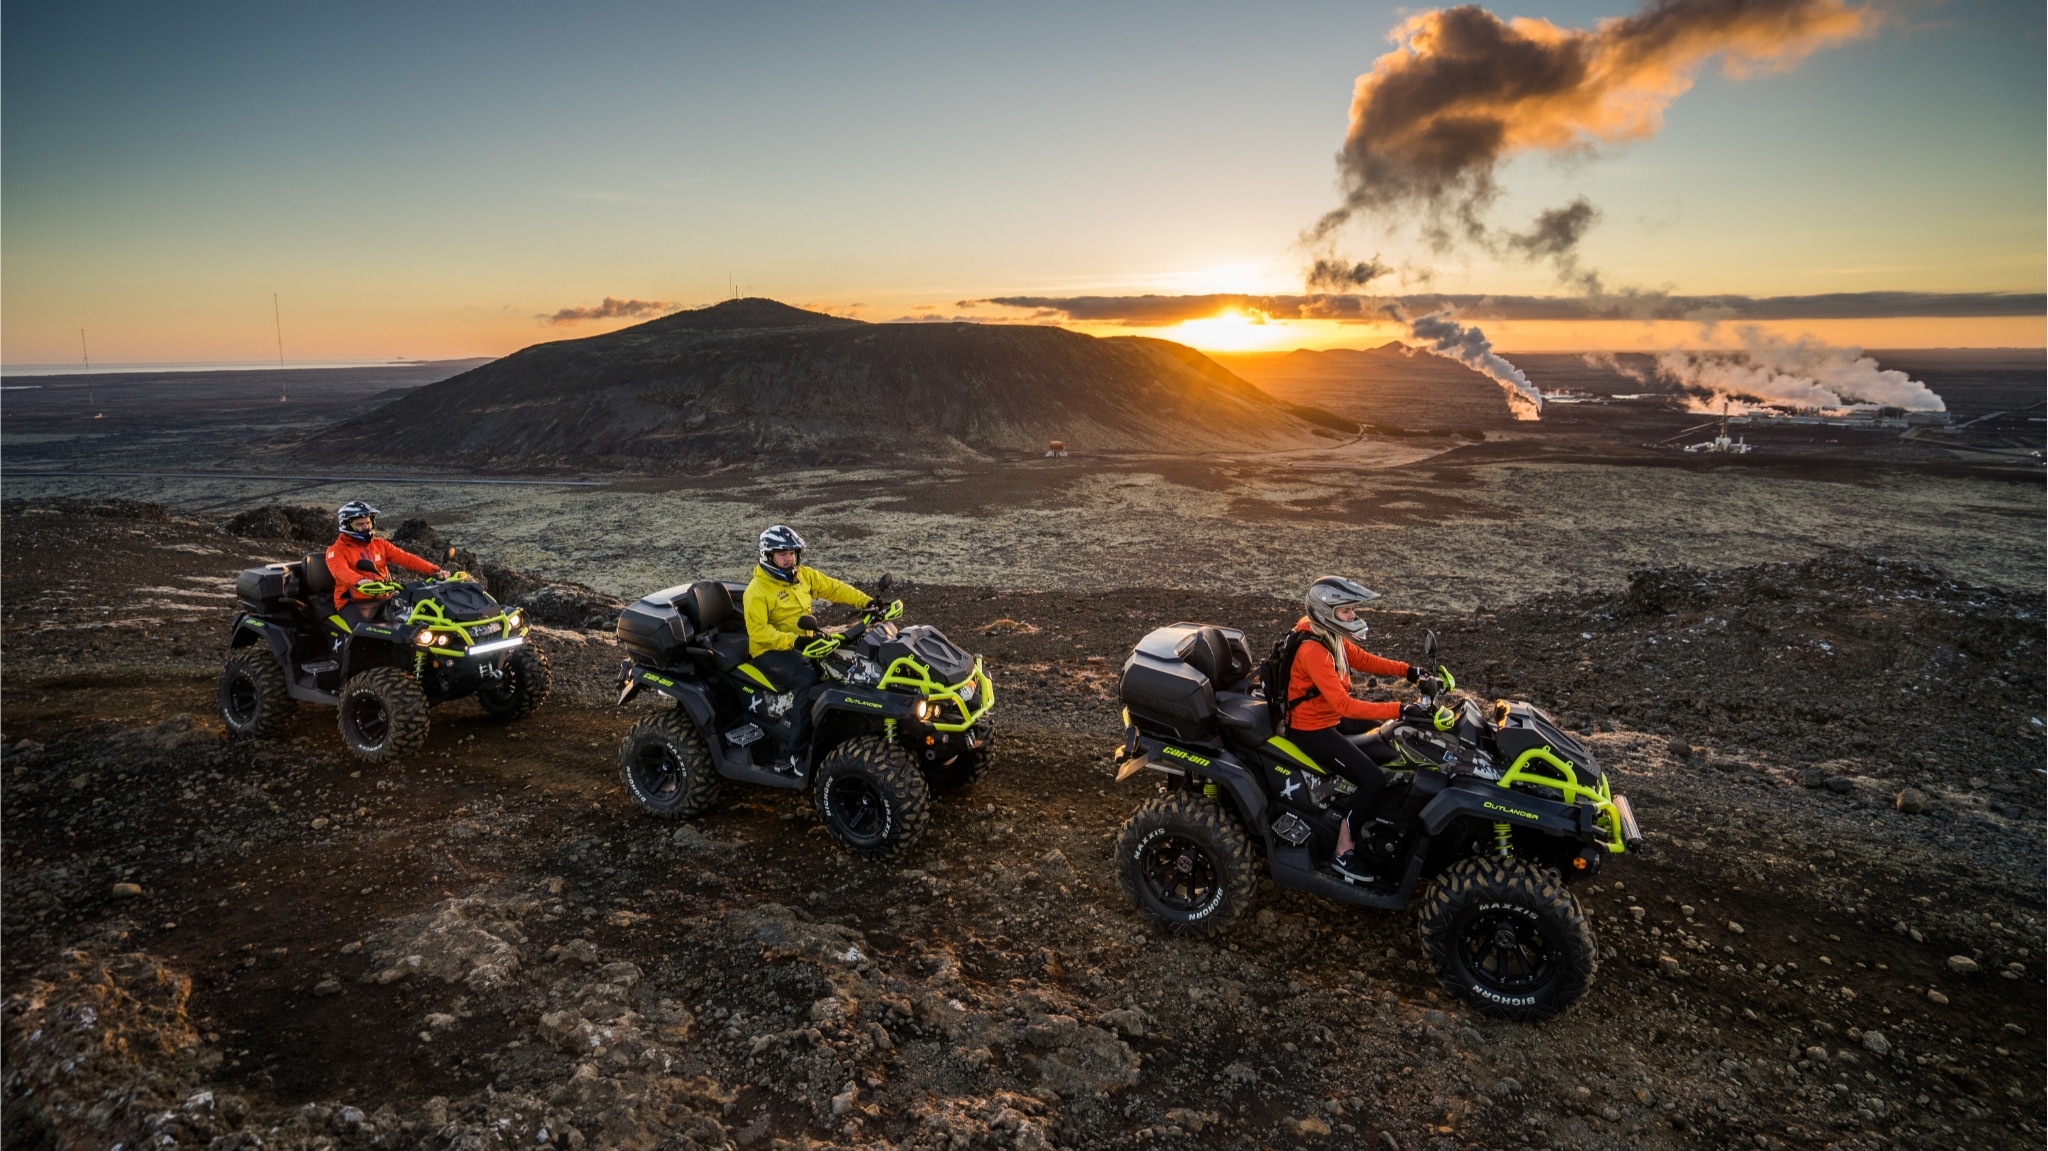 Group riding their ATV in the desert at sun down